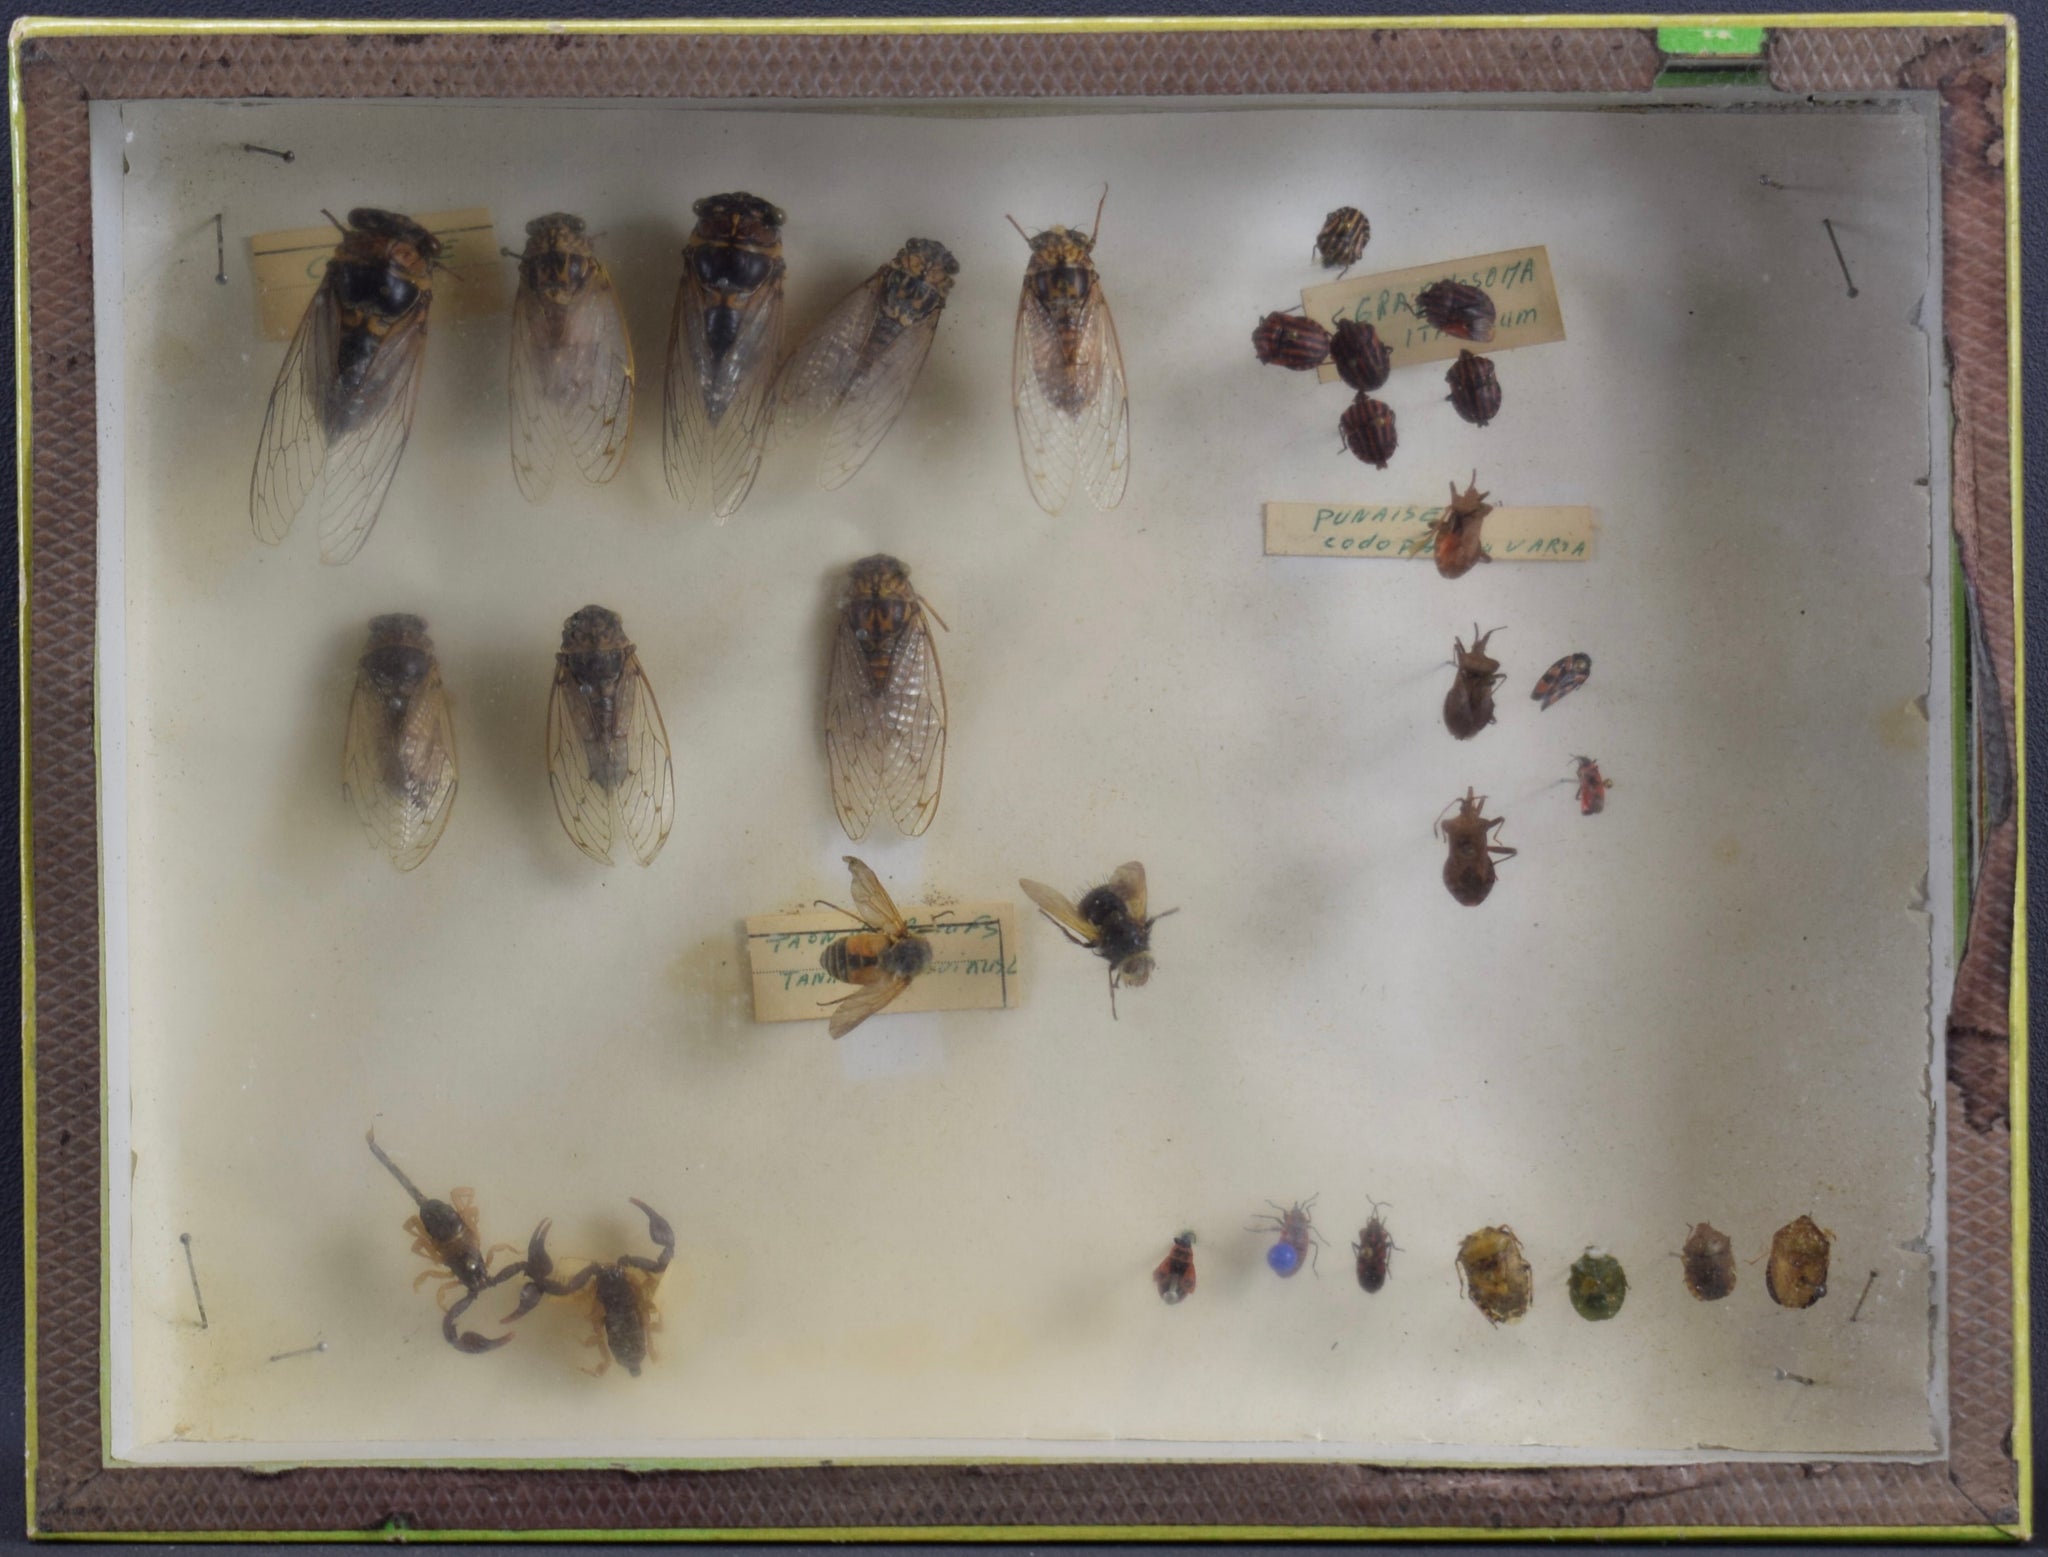 Hymenoptera Enthomology Taxidermy Shadow Box Old School Work Antique Framed Insects Display Cabinet Of Curiosities N BOUBEE Paris